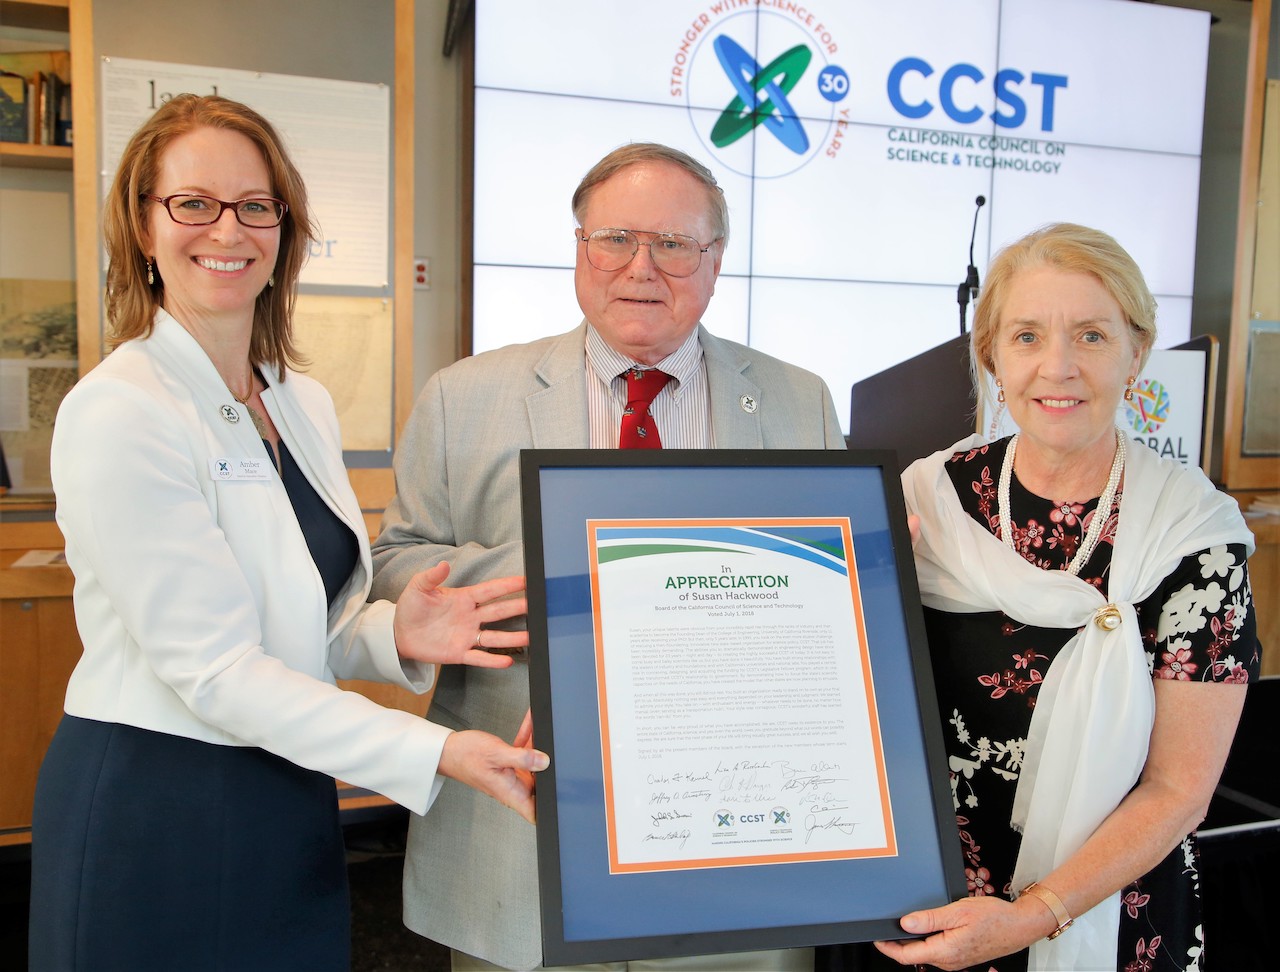 Three people holding a framed letter of appreciation in front of a screen projected with CCST's logo.